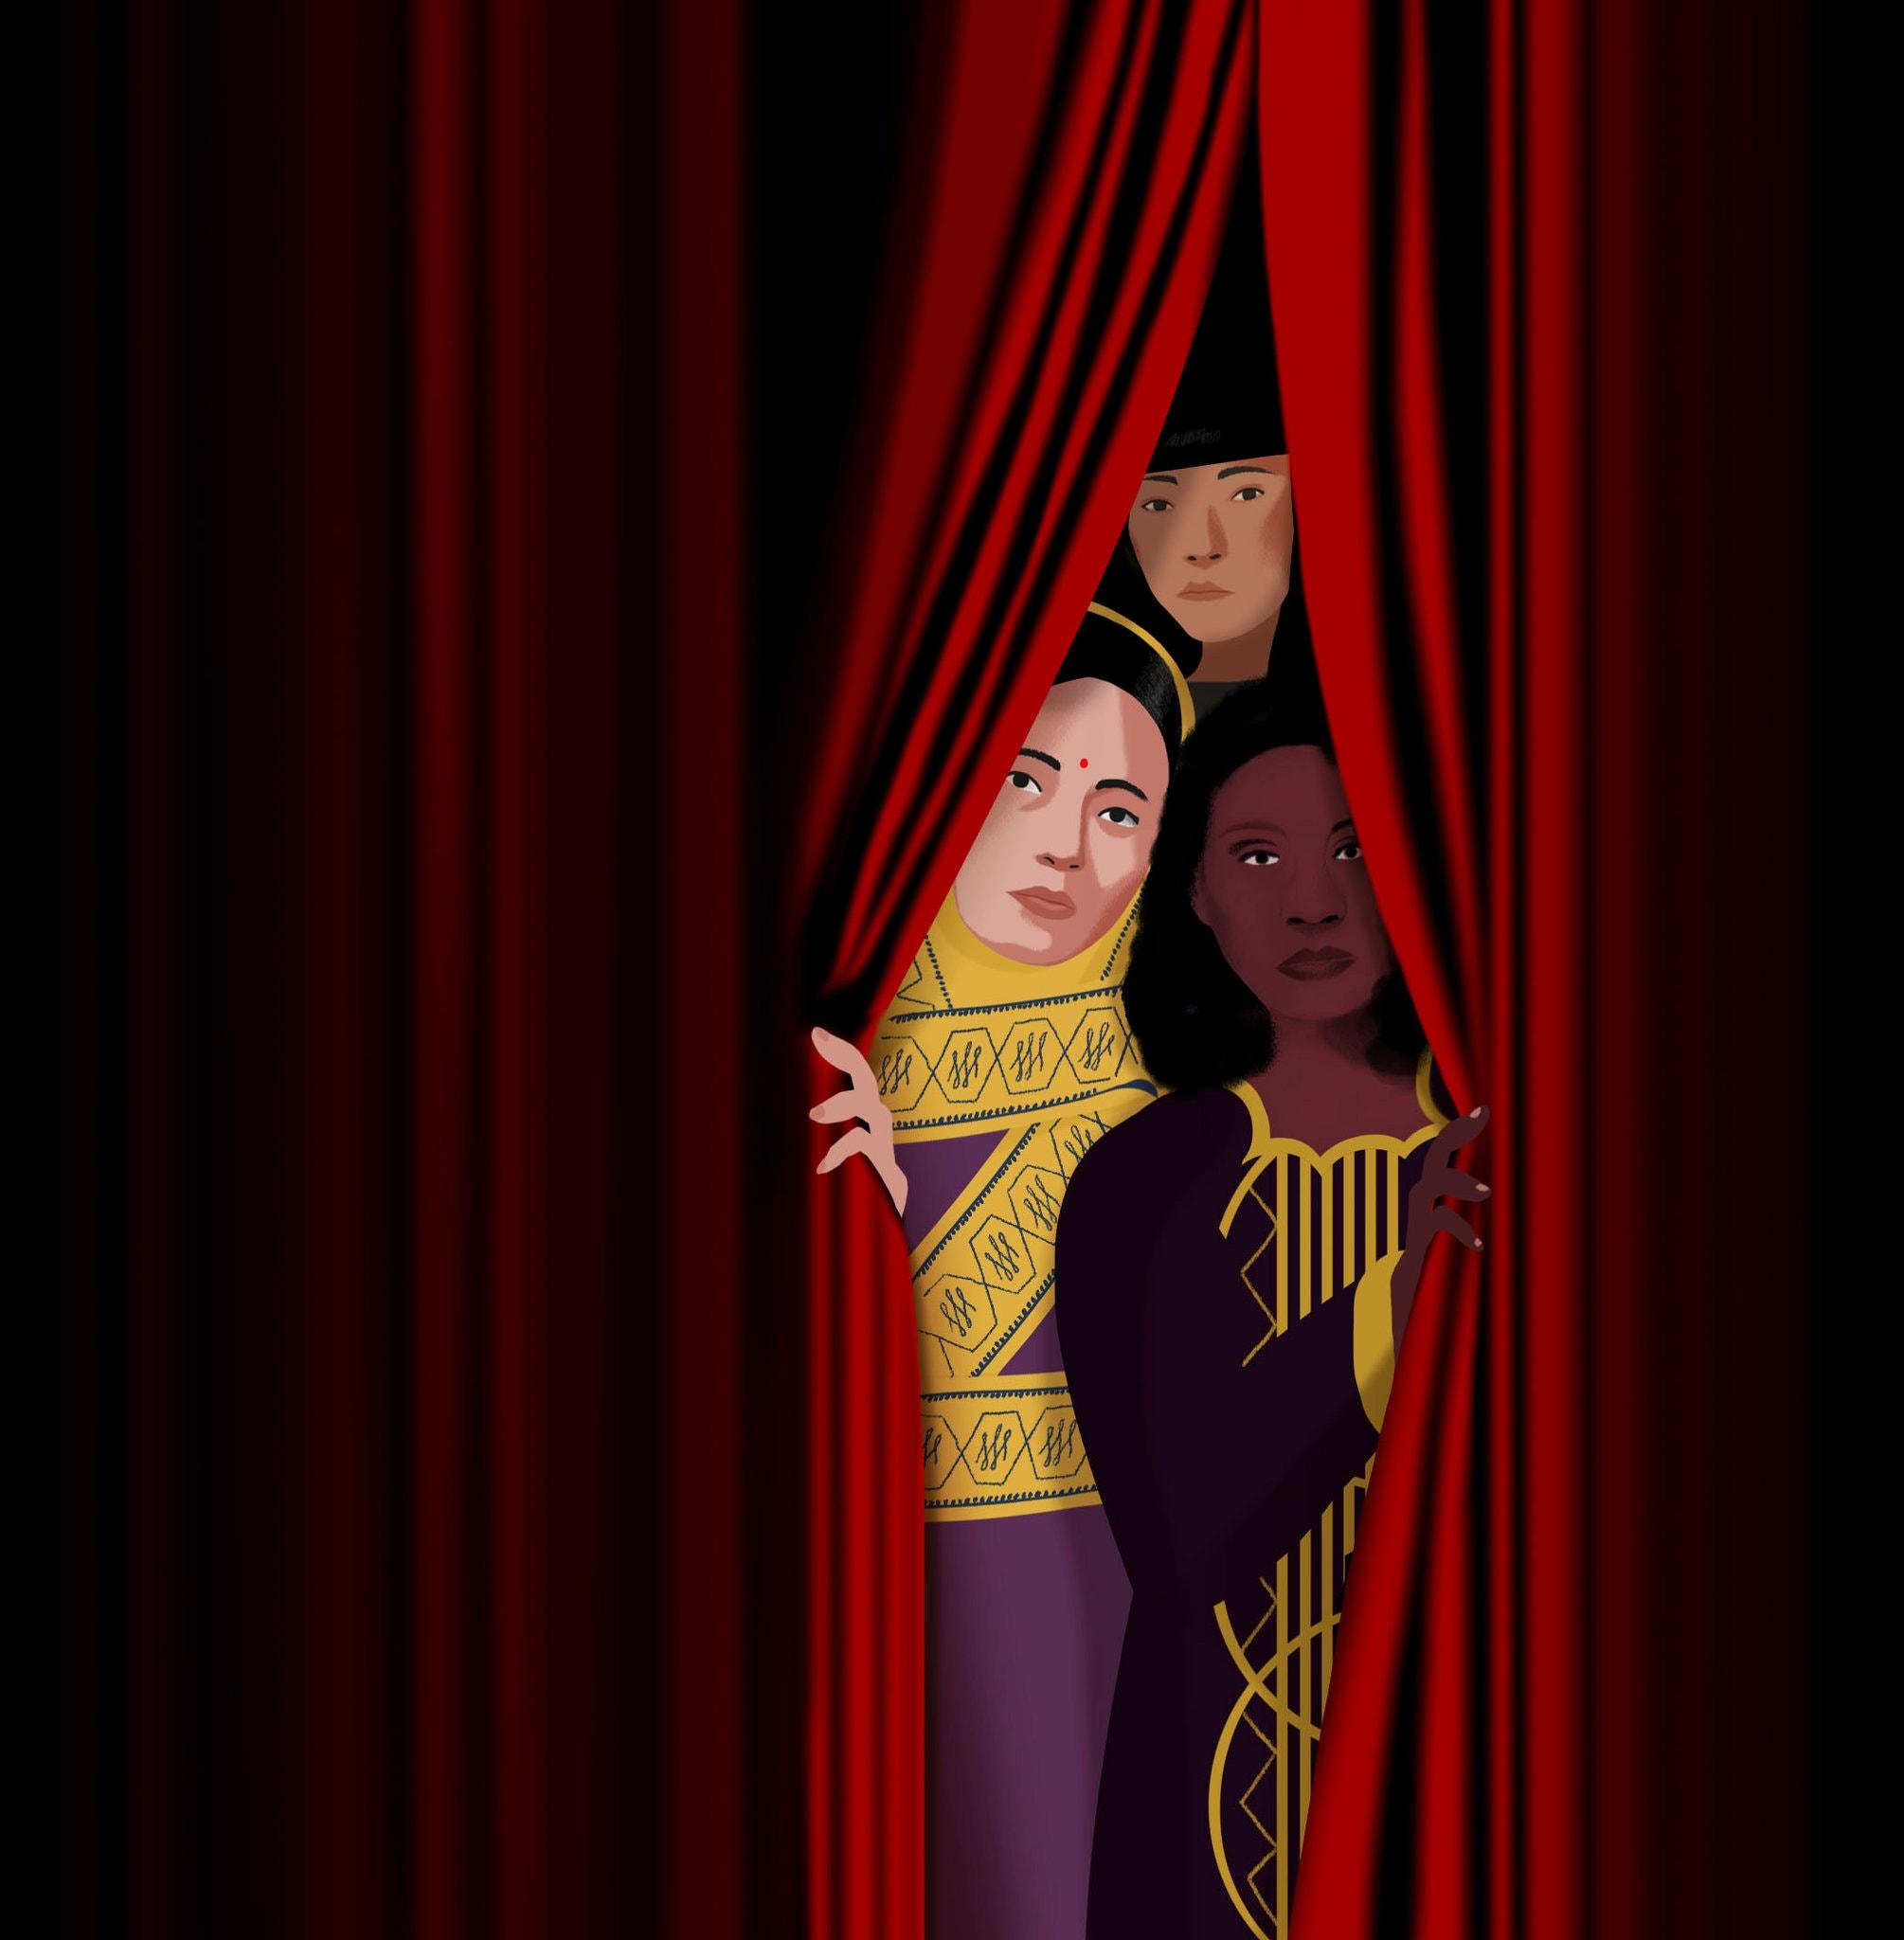 Three women standing behind a partially open red curtain